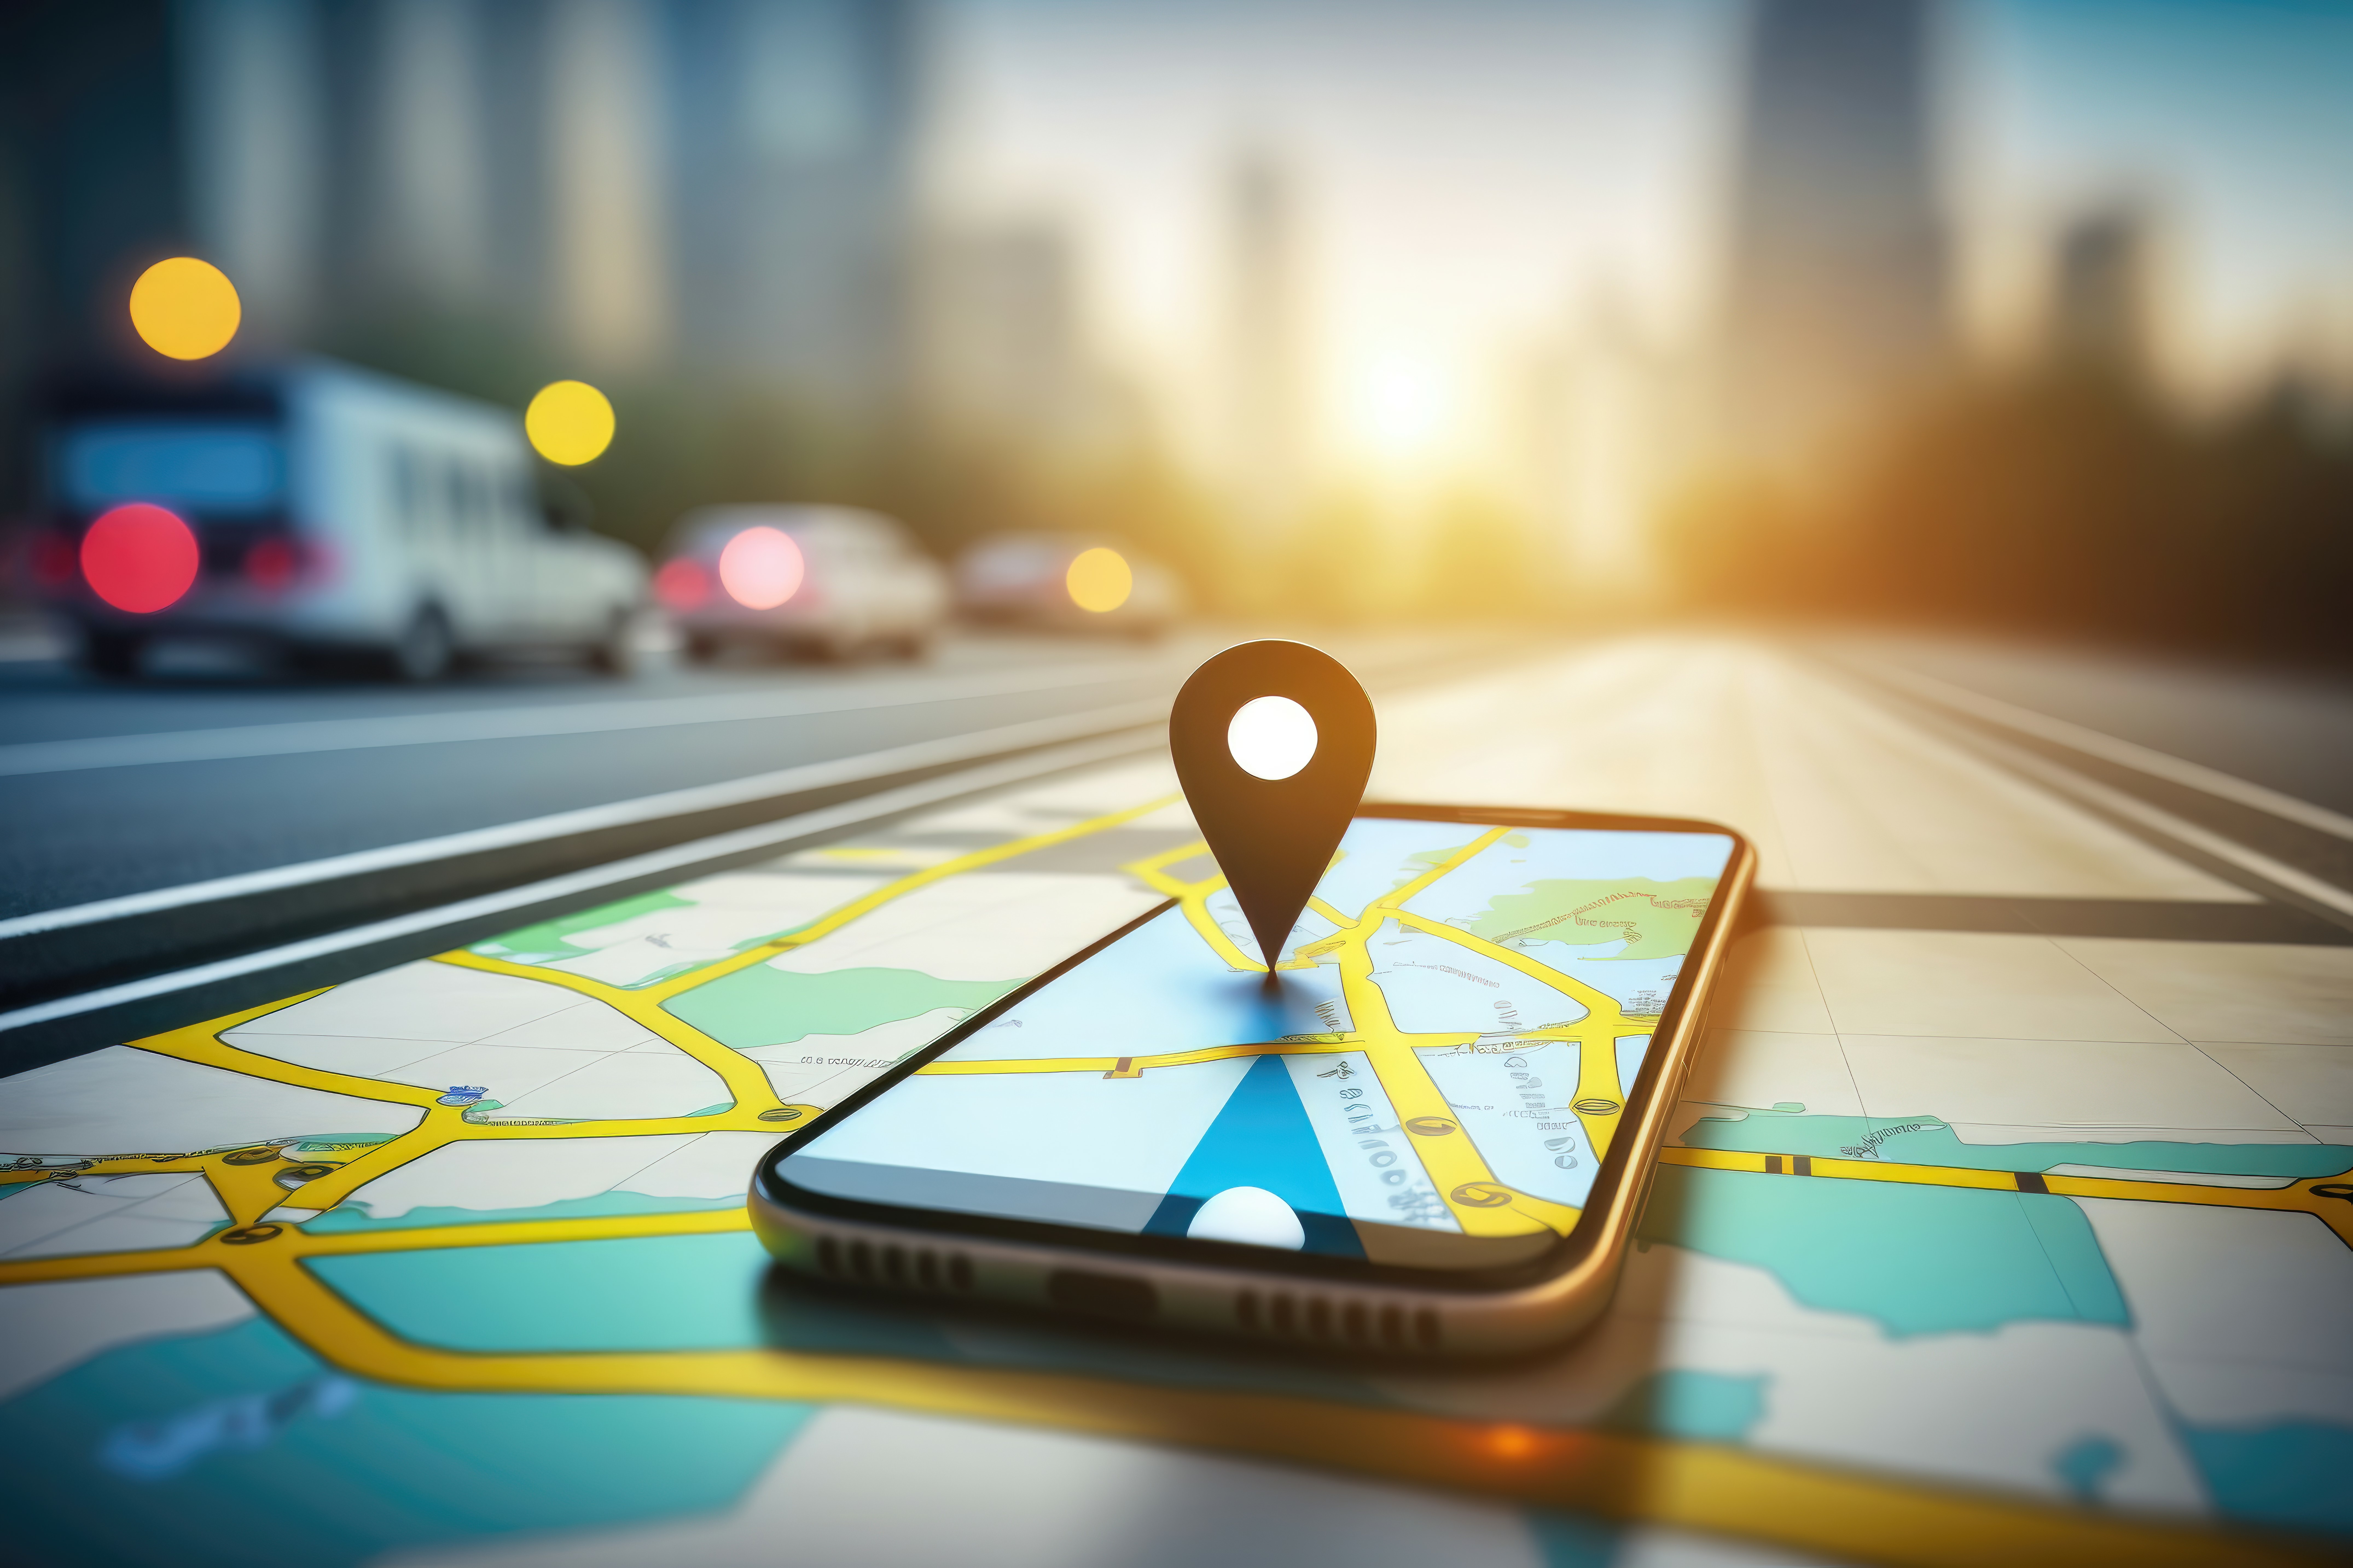 5 Reasons for Adding Floating Car Data to your Data Mix